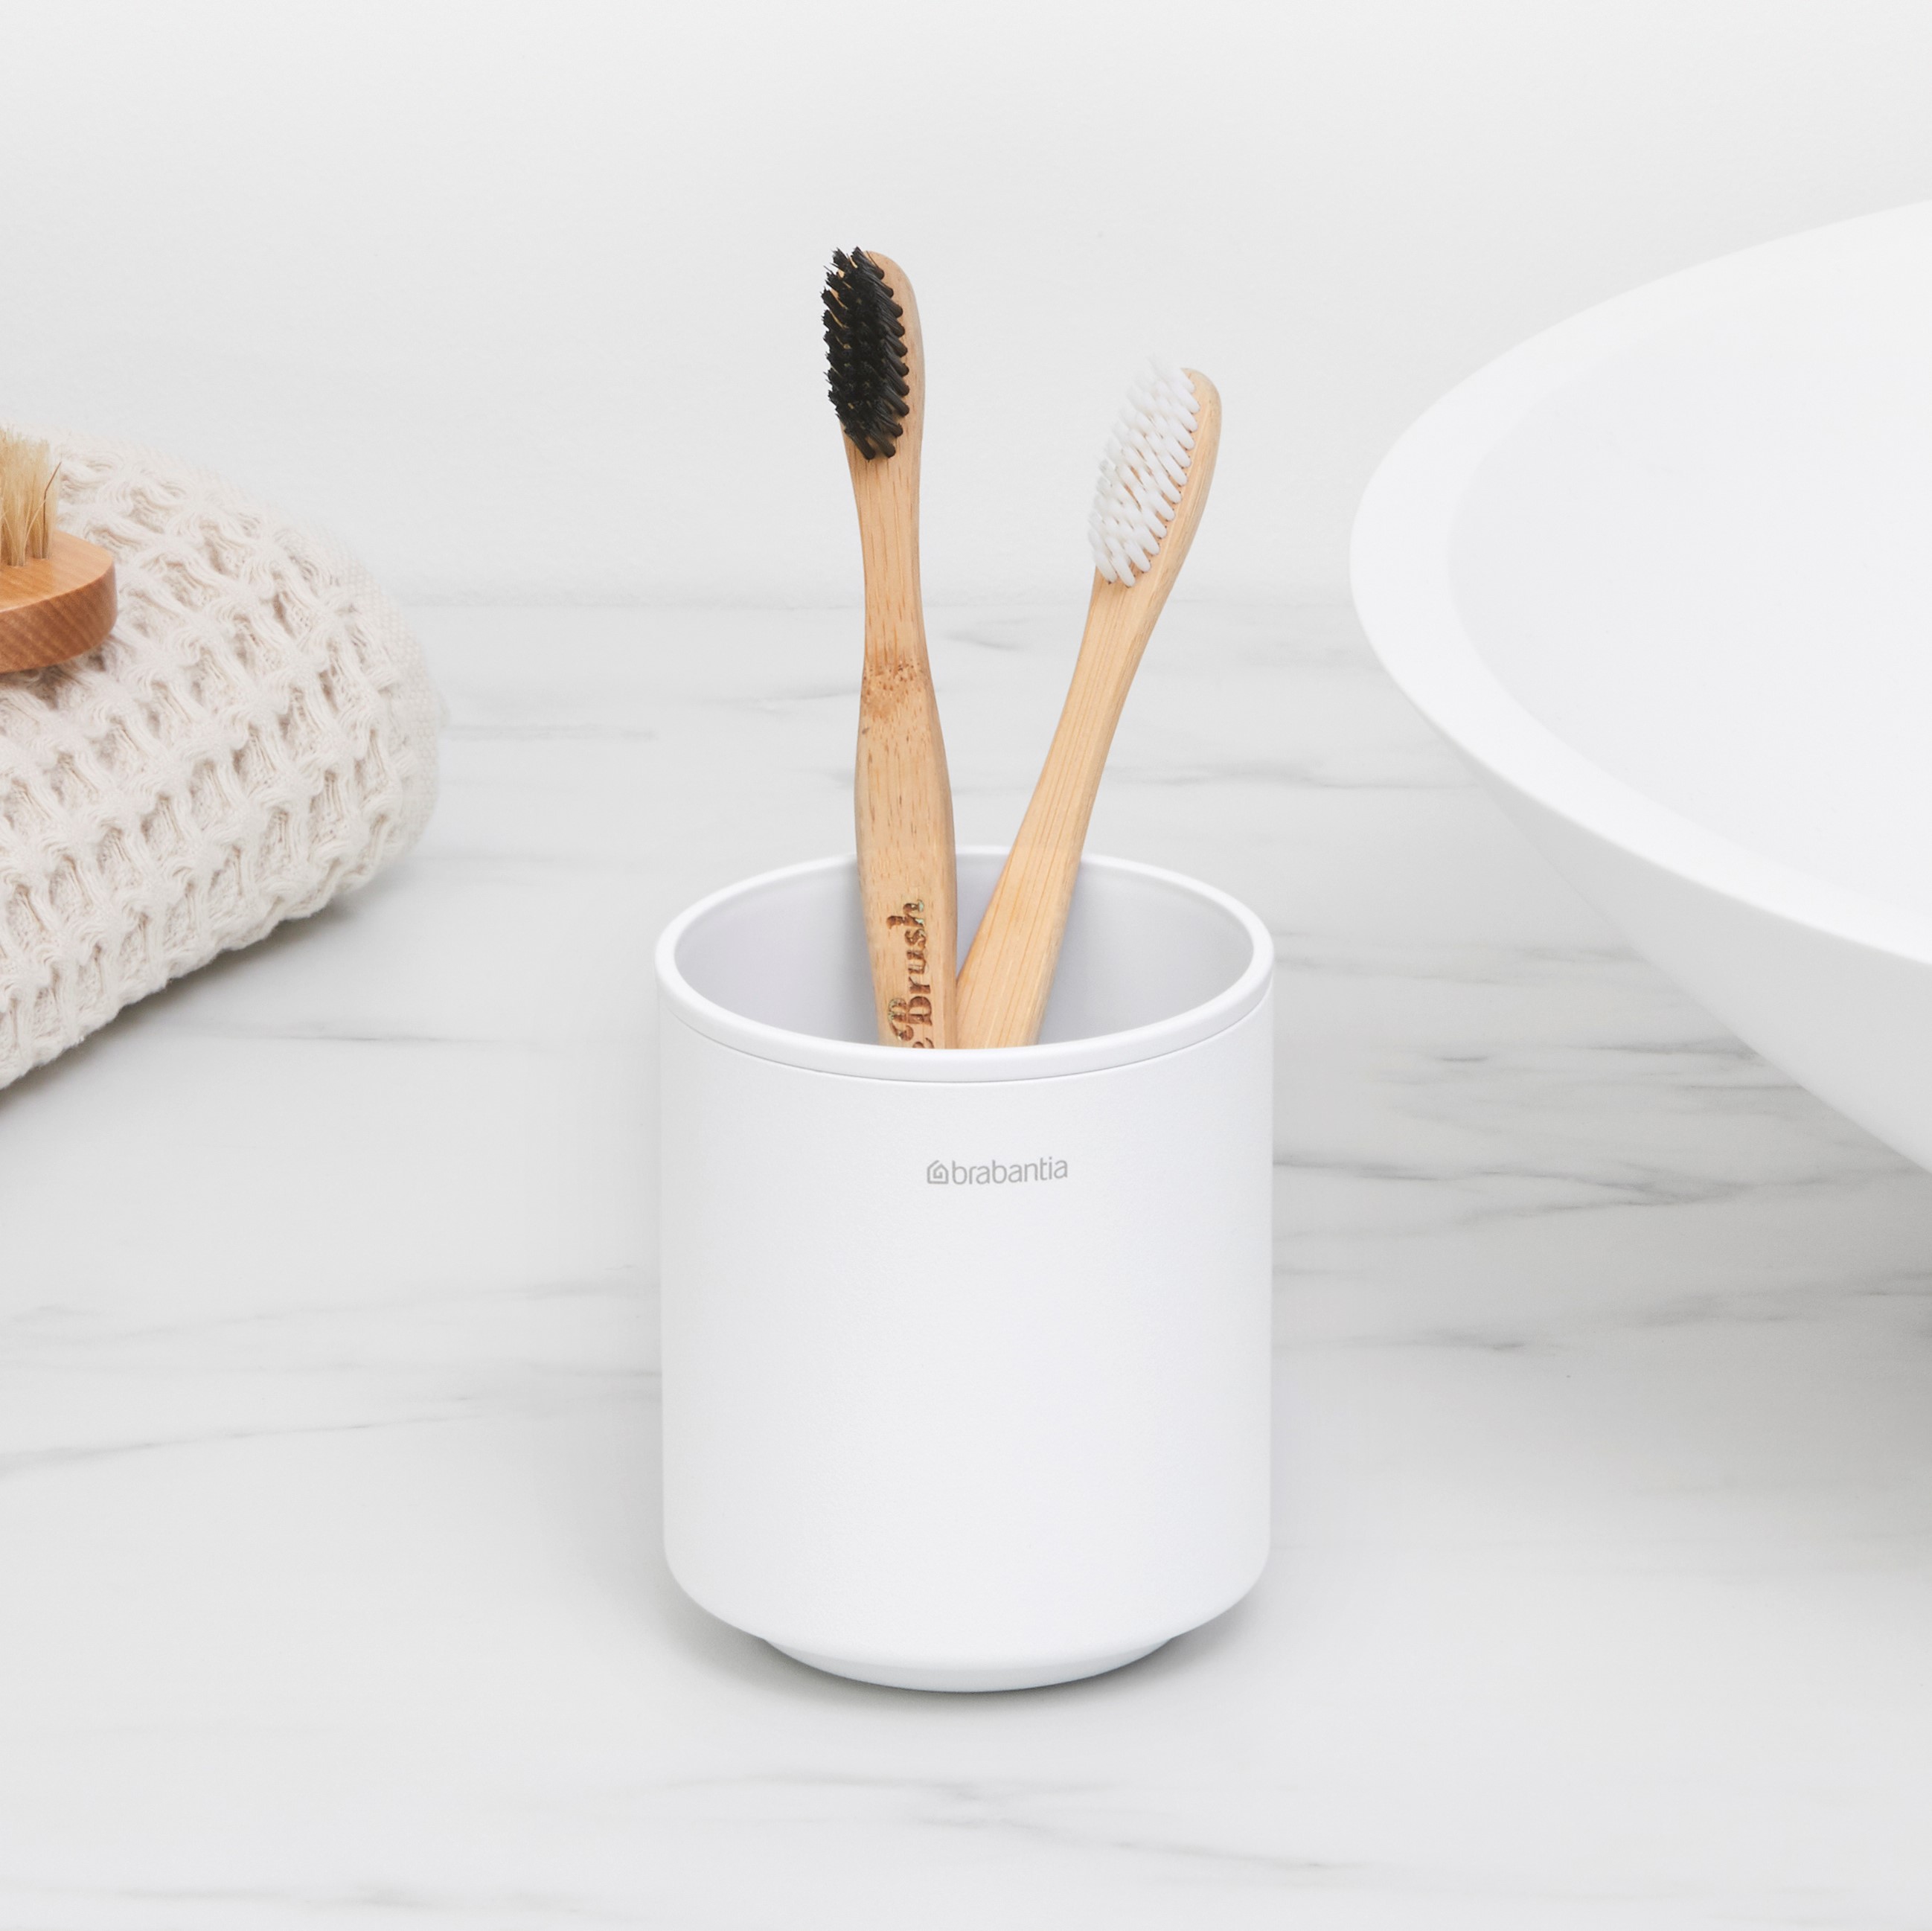 Brabantia MindSet Toothbrush Holder | The Container Store